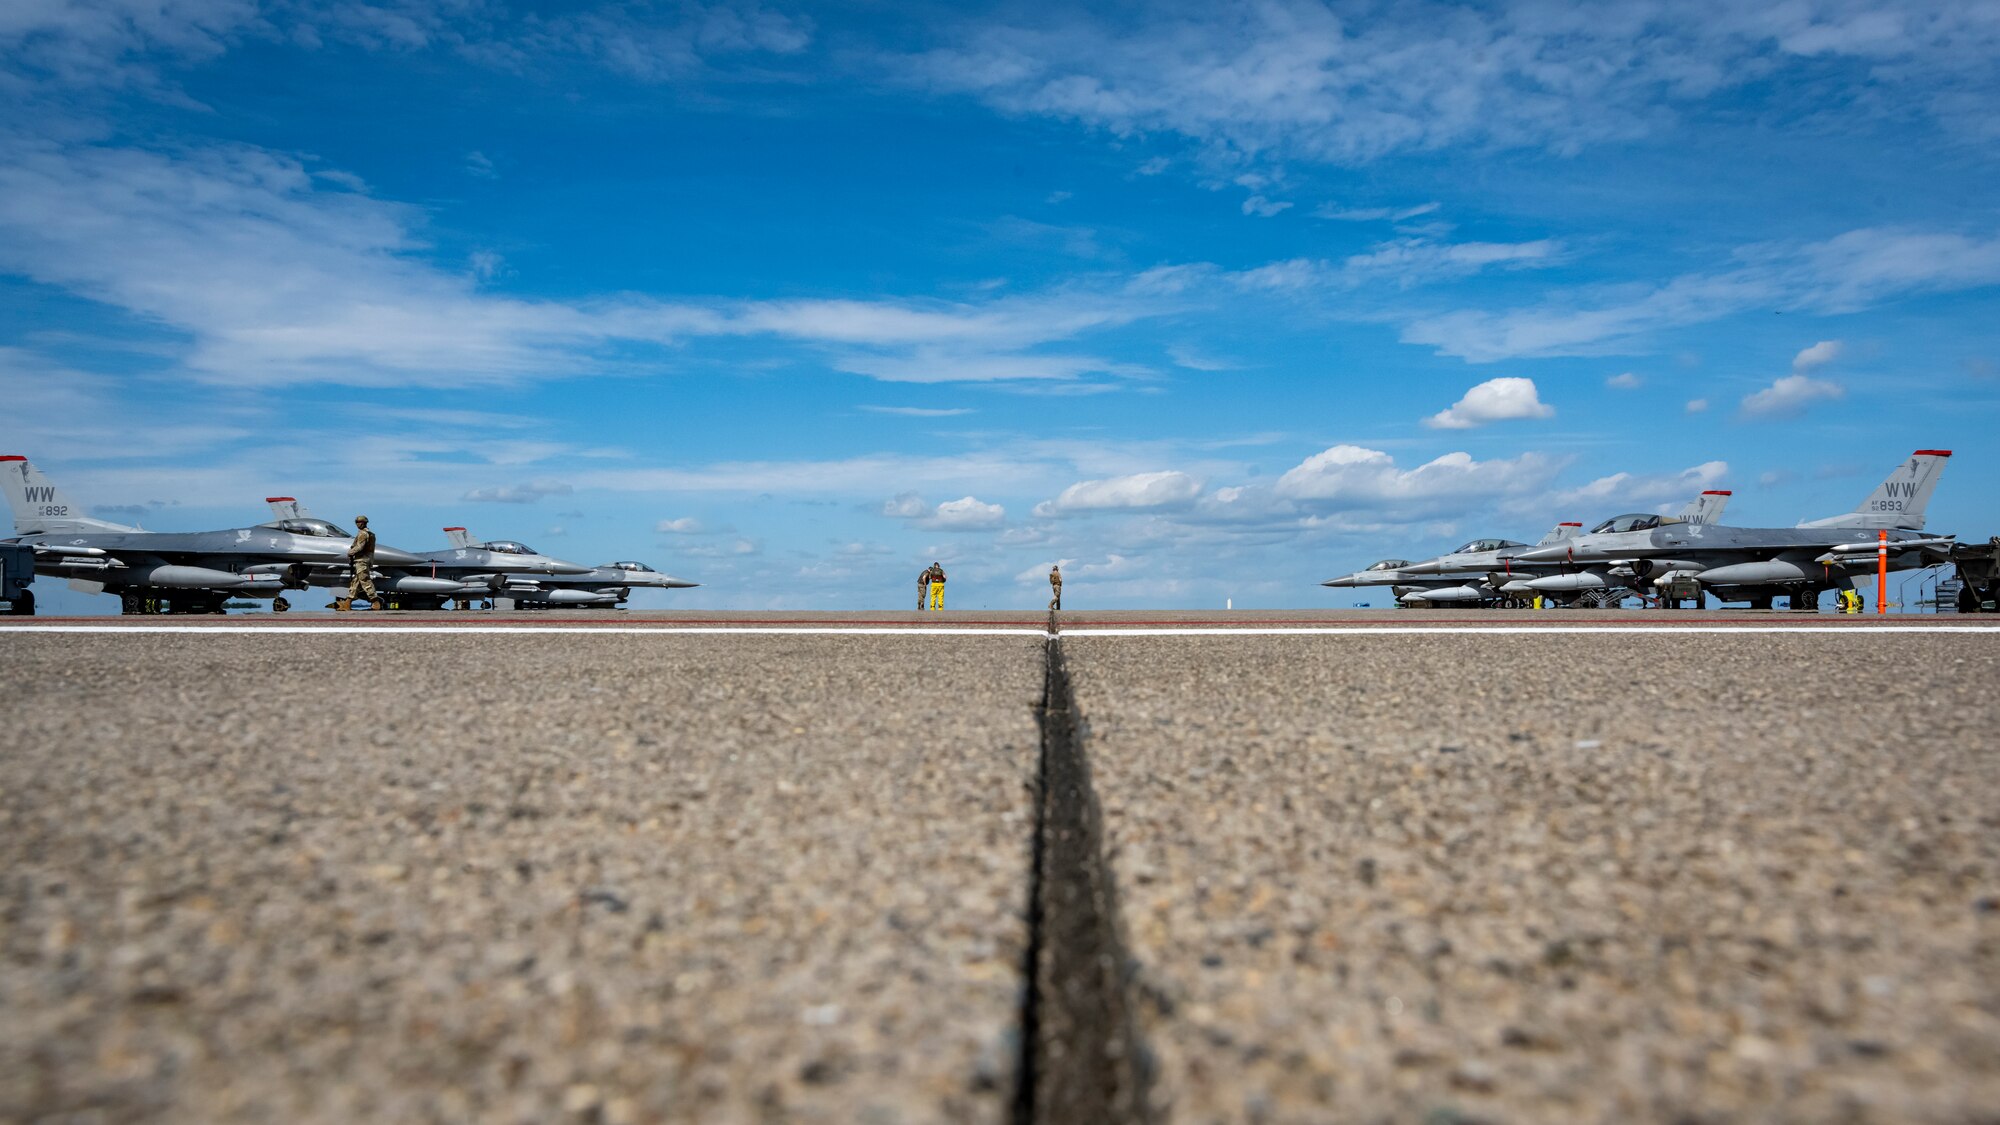 Fighter jets positioned on the flight line prior to taking off.